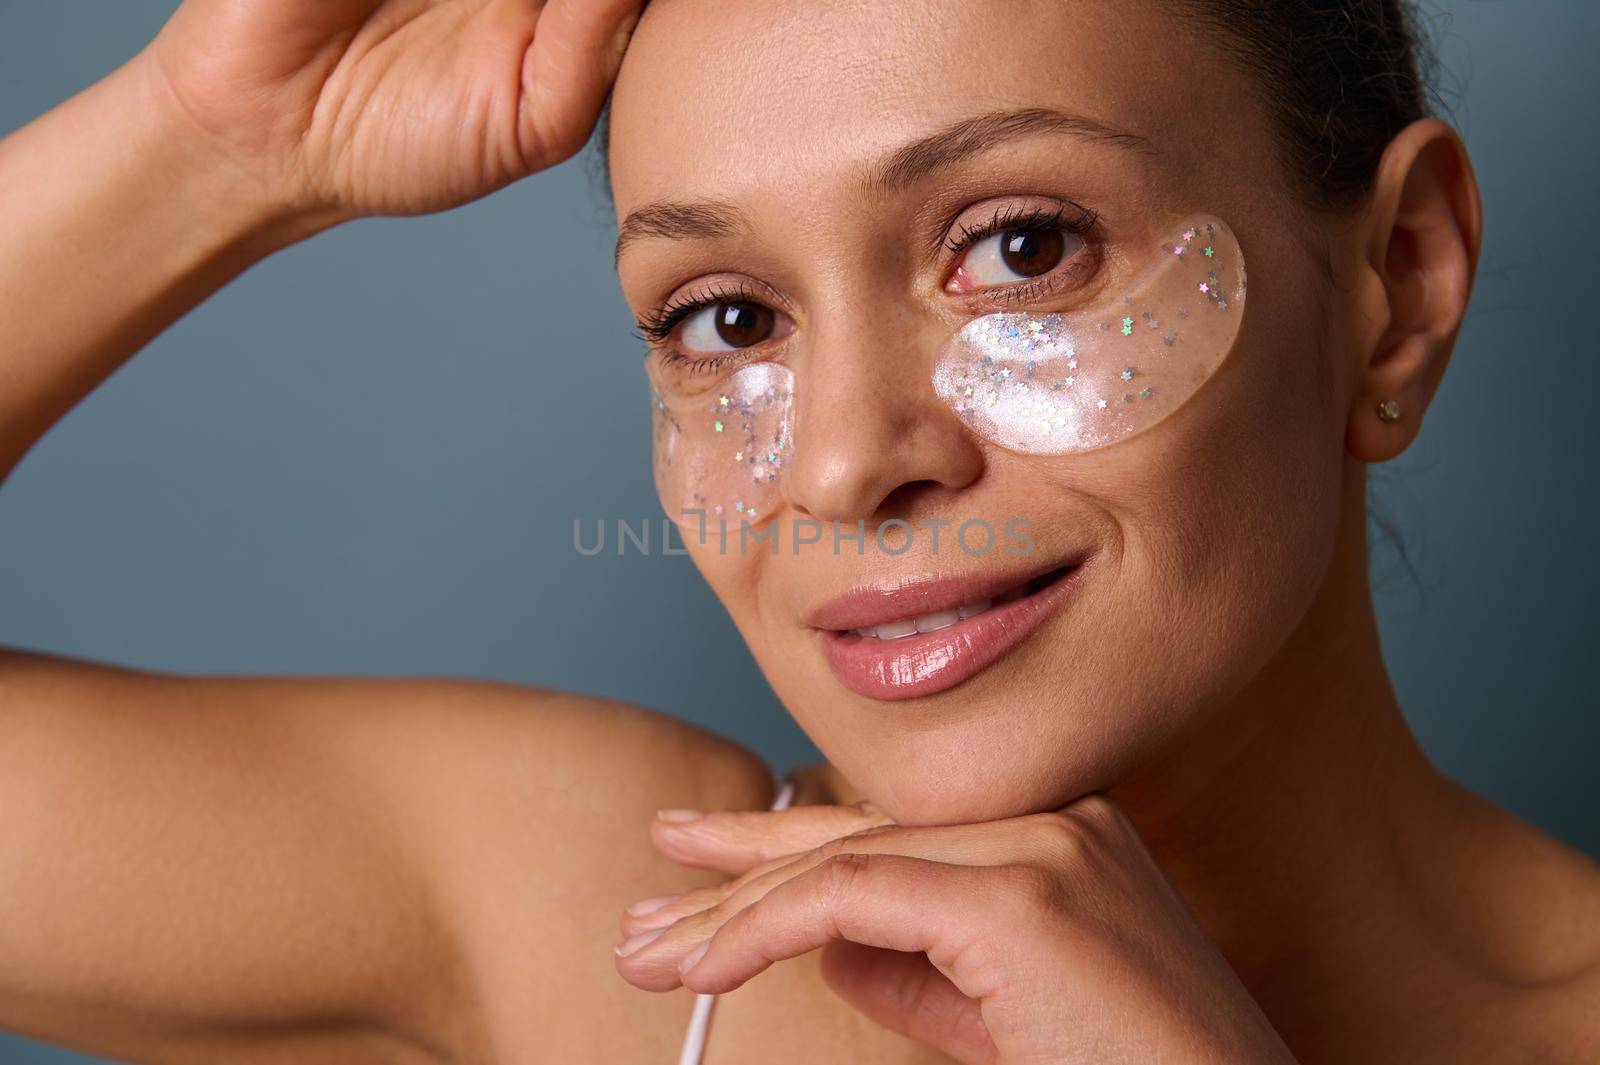 Close-up portrait of a beautiful smiling woman applying gold medical hydrogel collagen eye patches to reduce bags under her eyes and puffiness, posing at camera against a gray background. Copy space